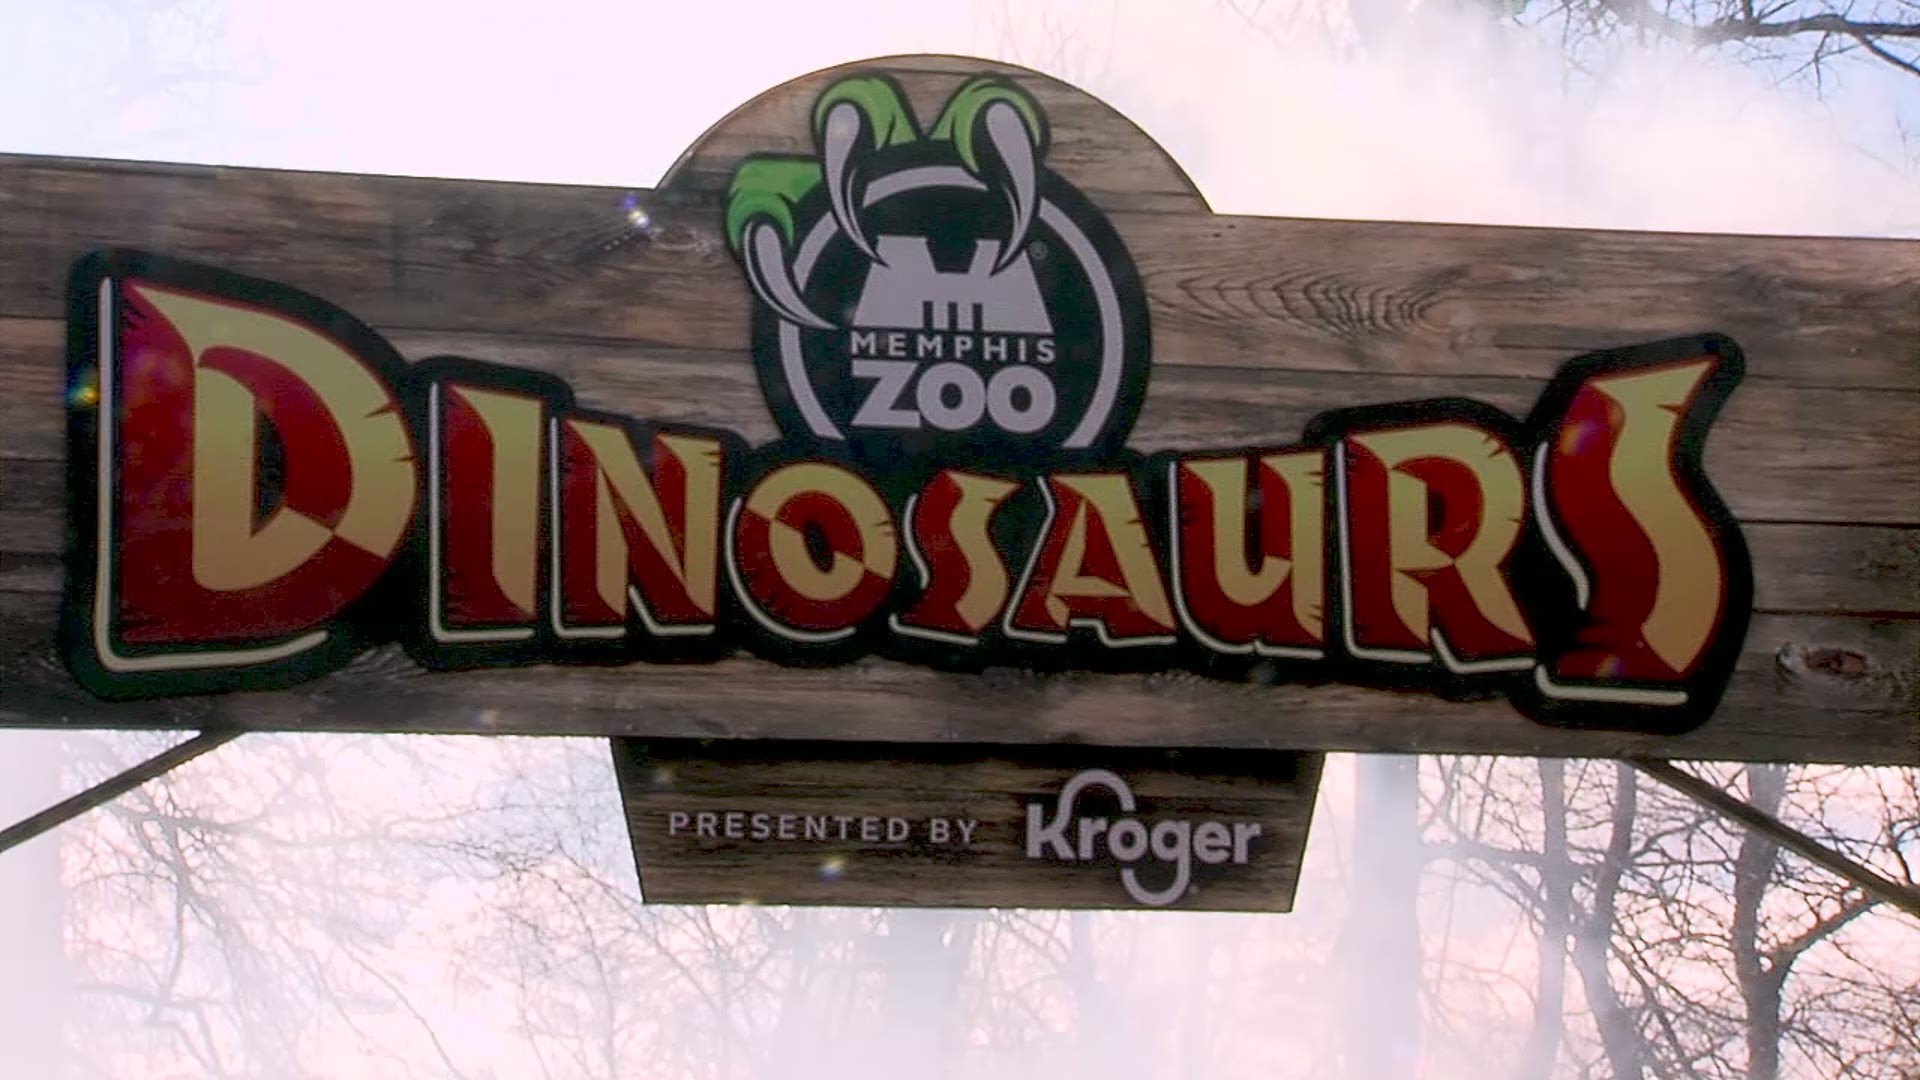 Explore the world of the dinosaurs as Memphis Zoo researchers relate prehistoric beings to the animals of today.